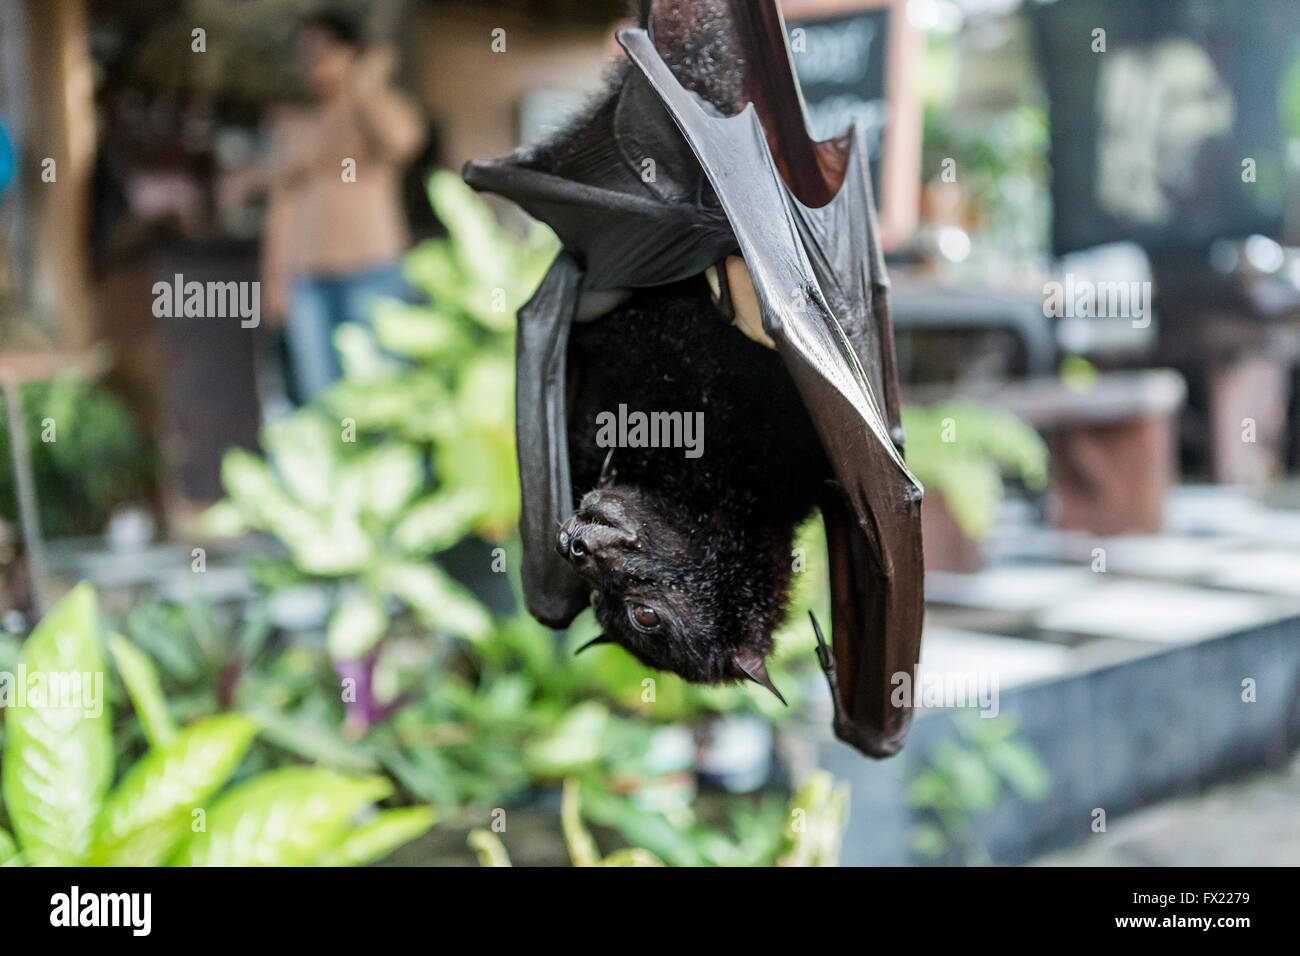 Tame bat sleeping at a market. The bat is for attracting customers to that particular stall. Tanah Lot, Bali, Indonesia Stock Photo